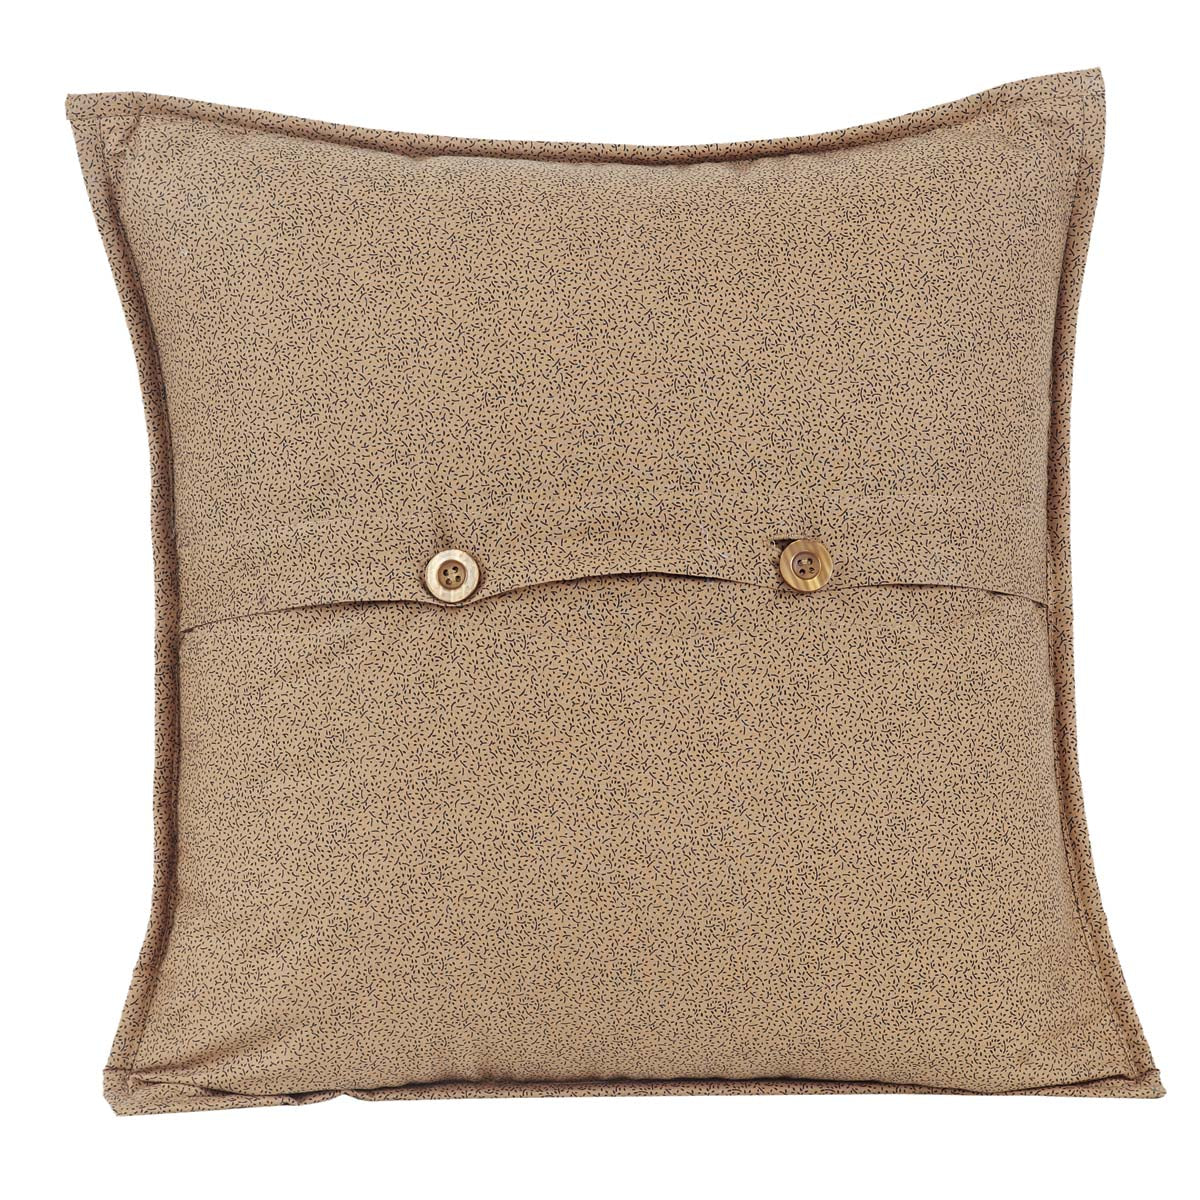 32931-Millsboro-Pillow-Quilted-16x16-image-5